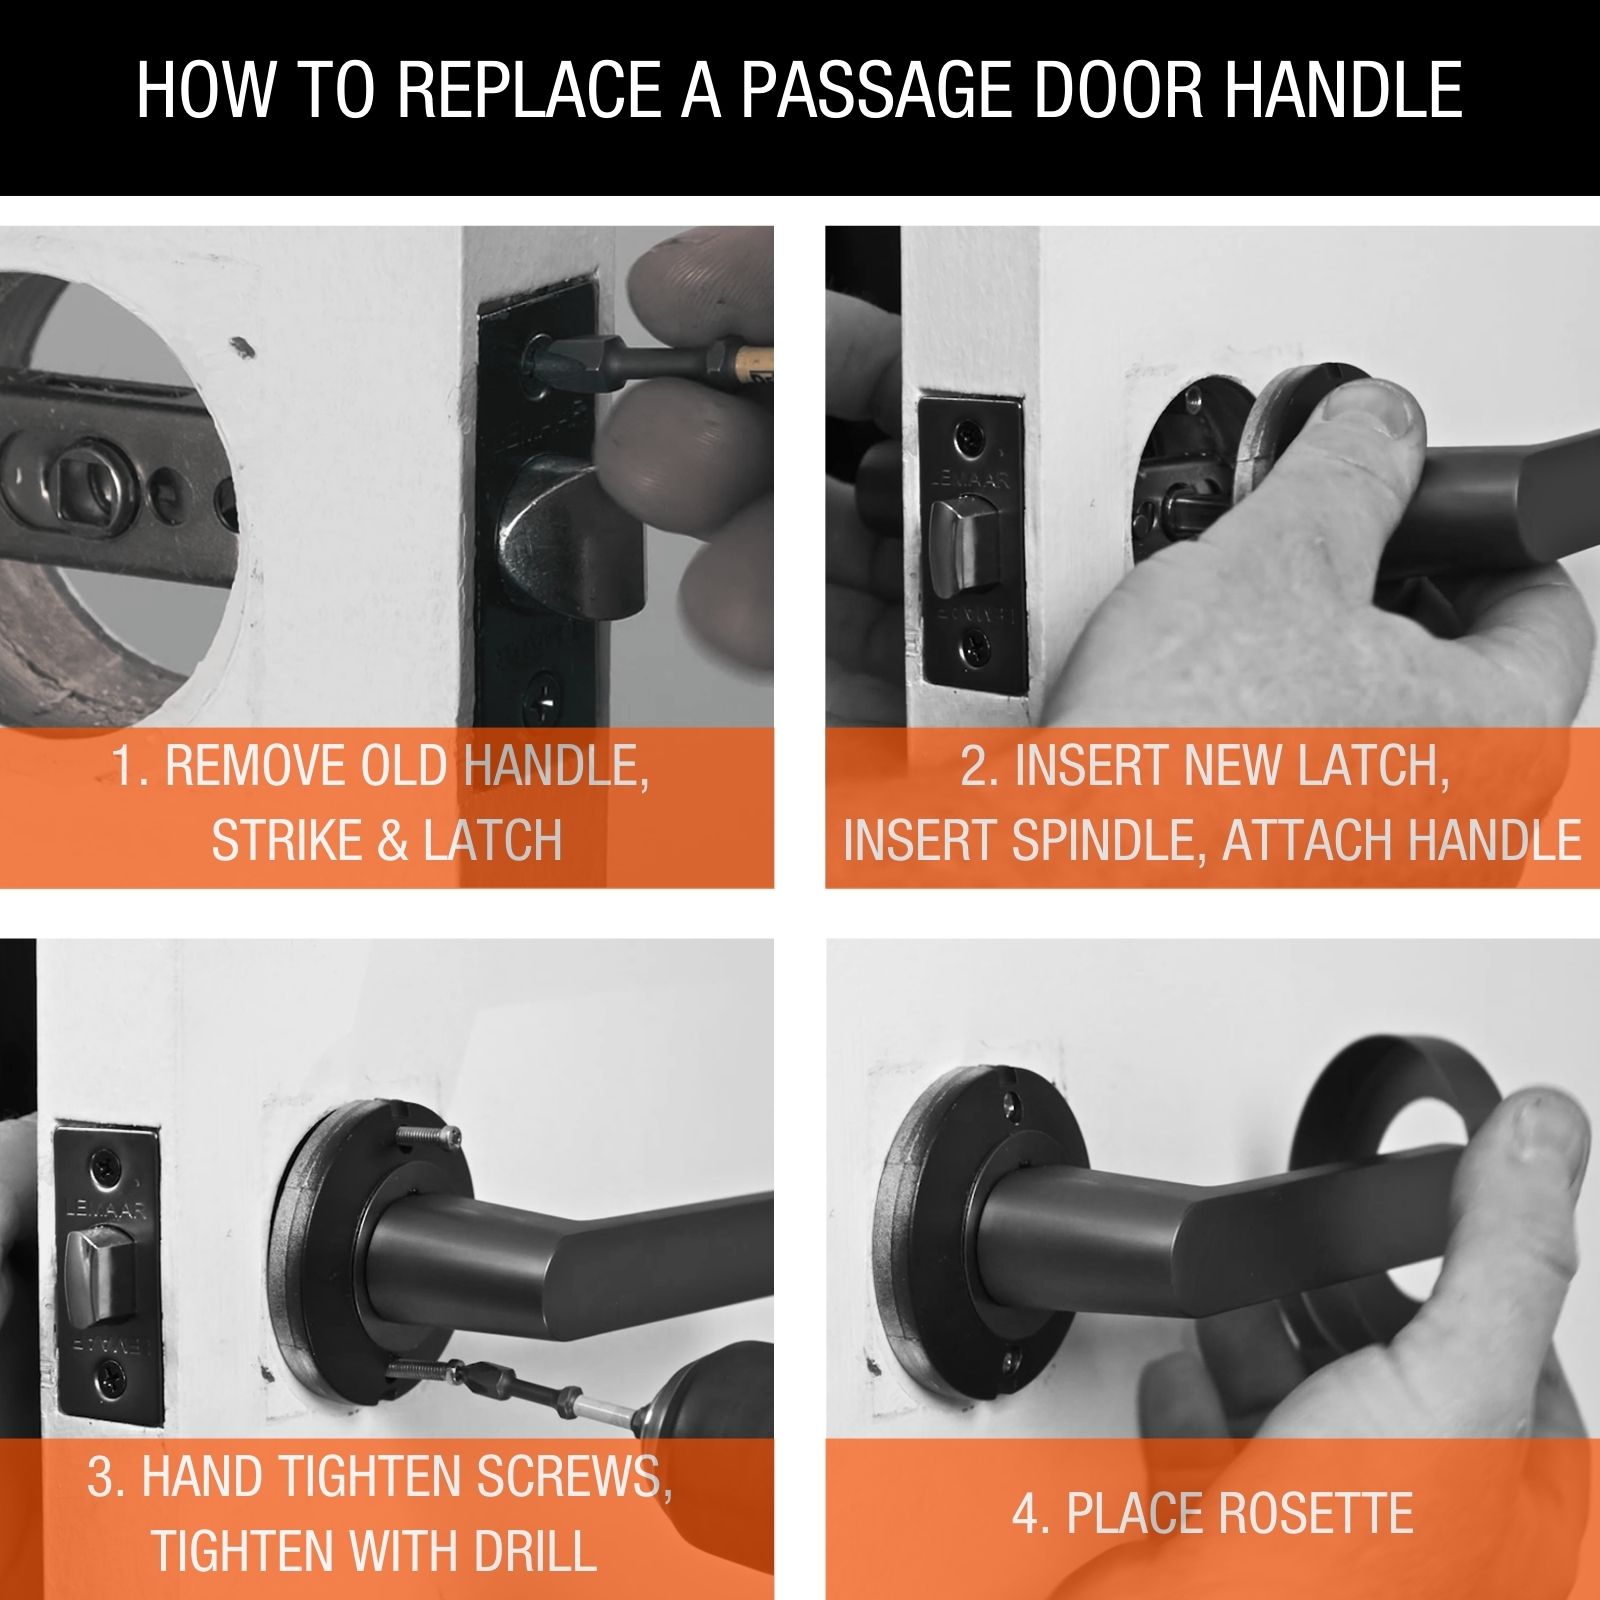 HOW TO REPLACE A PASSAGE DOOR HANDLE 2 v2